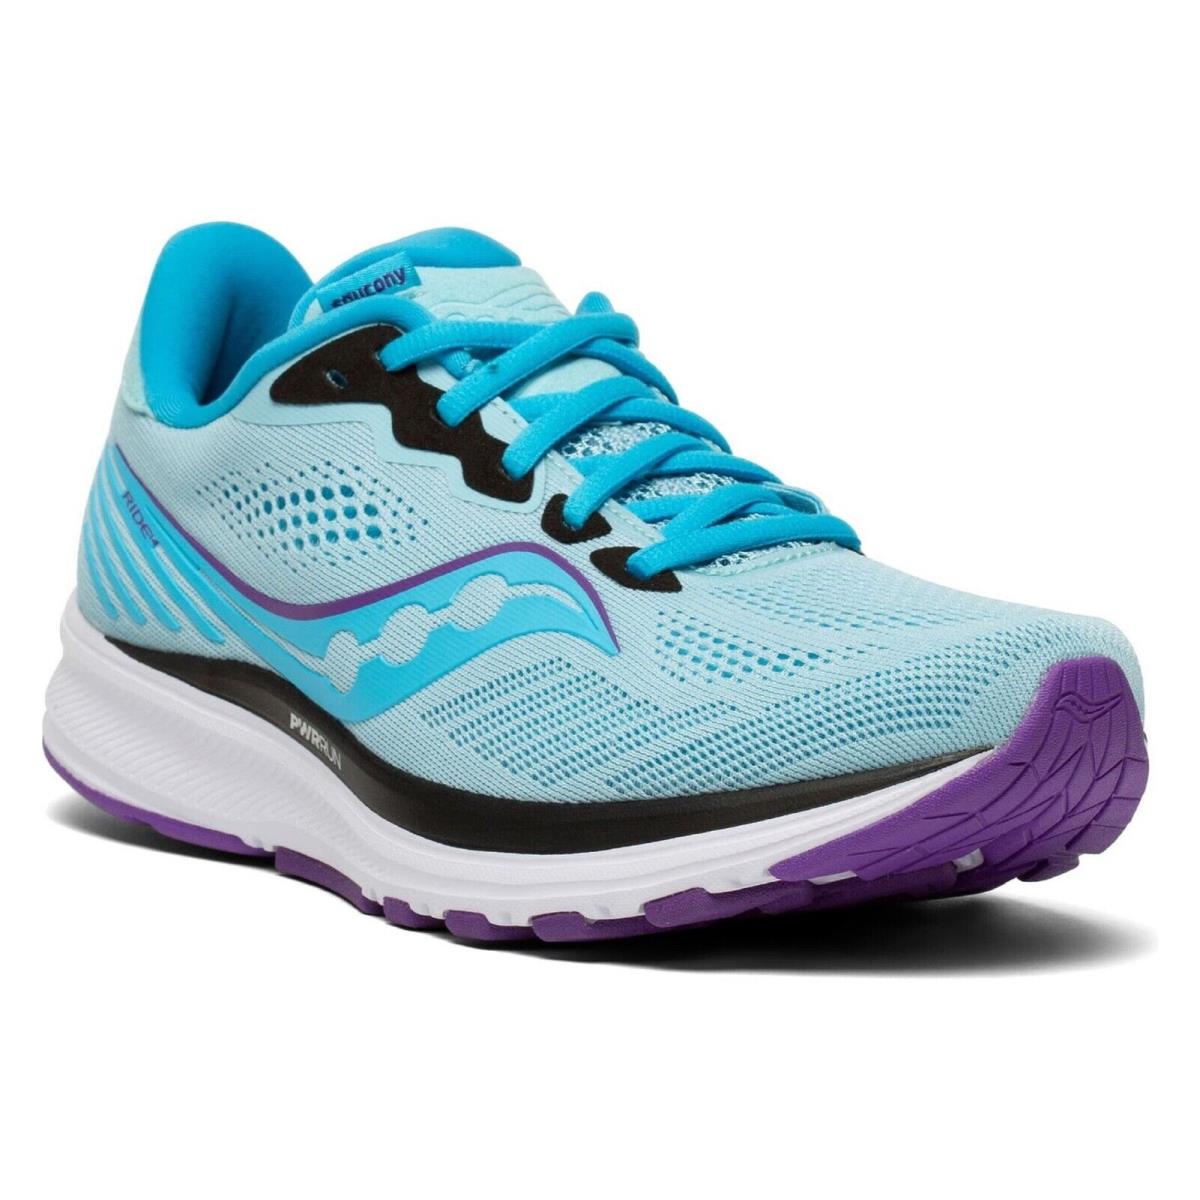 Wmns Saucony Ride 14 Powder Light Blue Concord Purple 9 S10650-20 Running Shoes